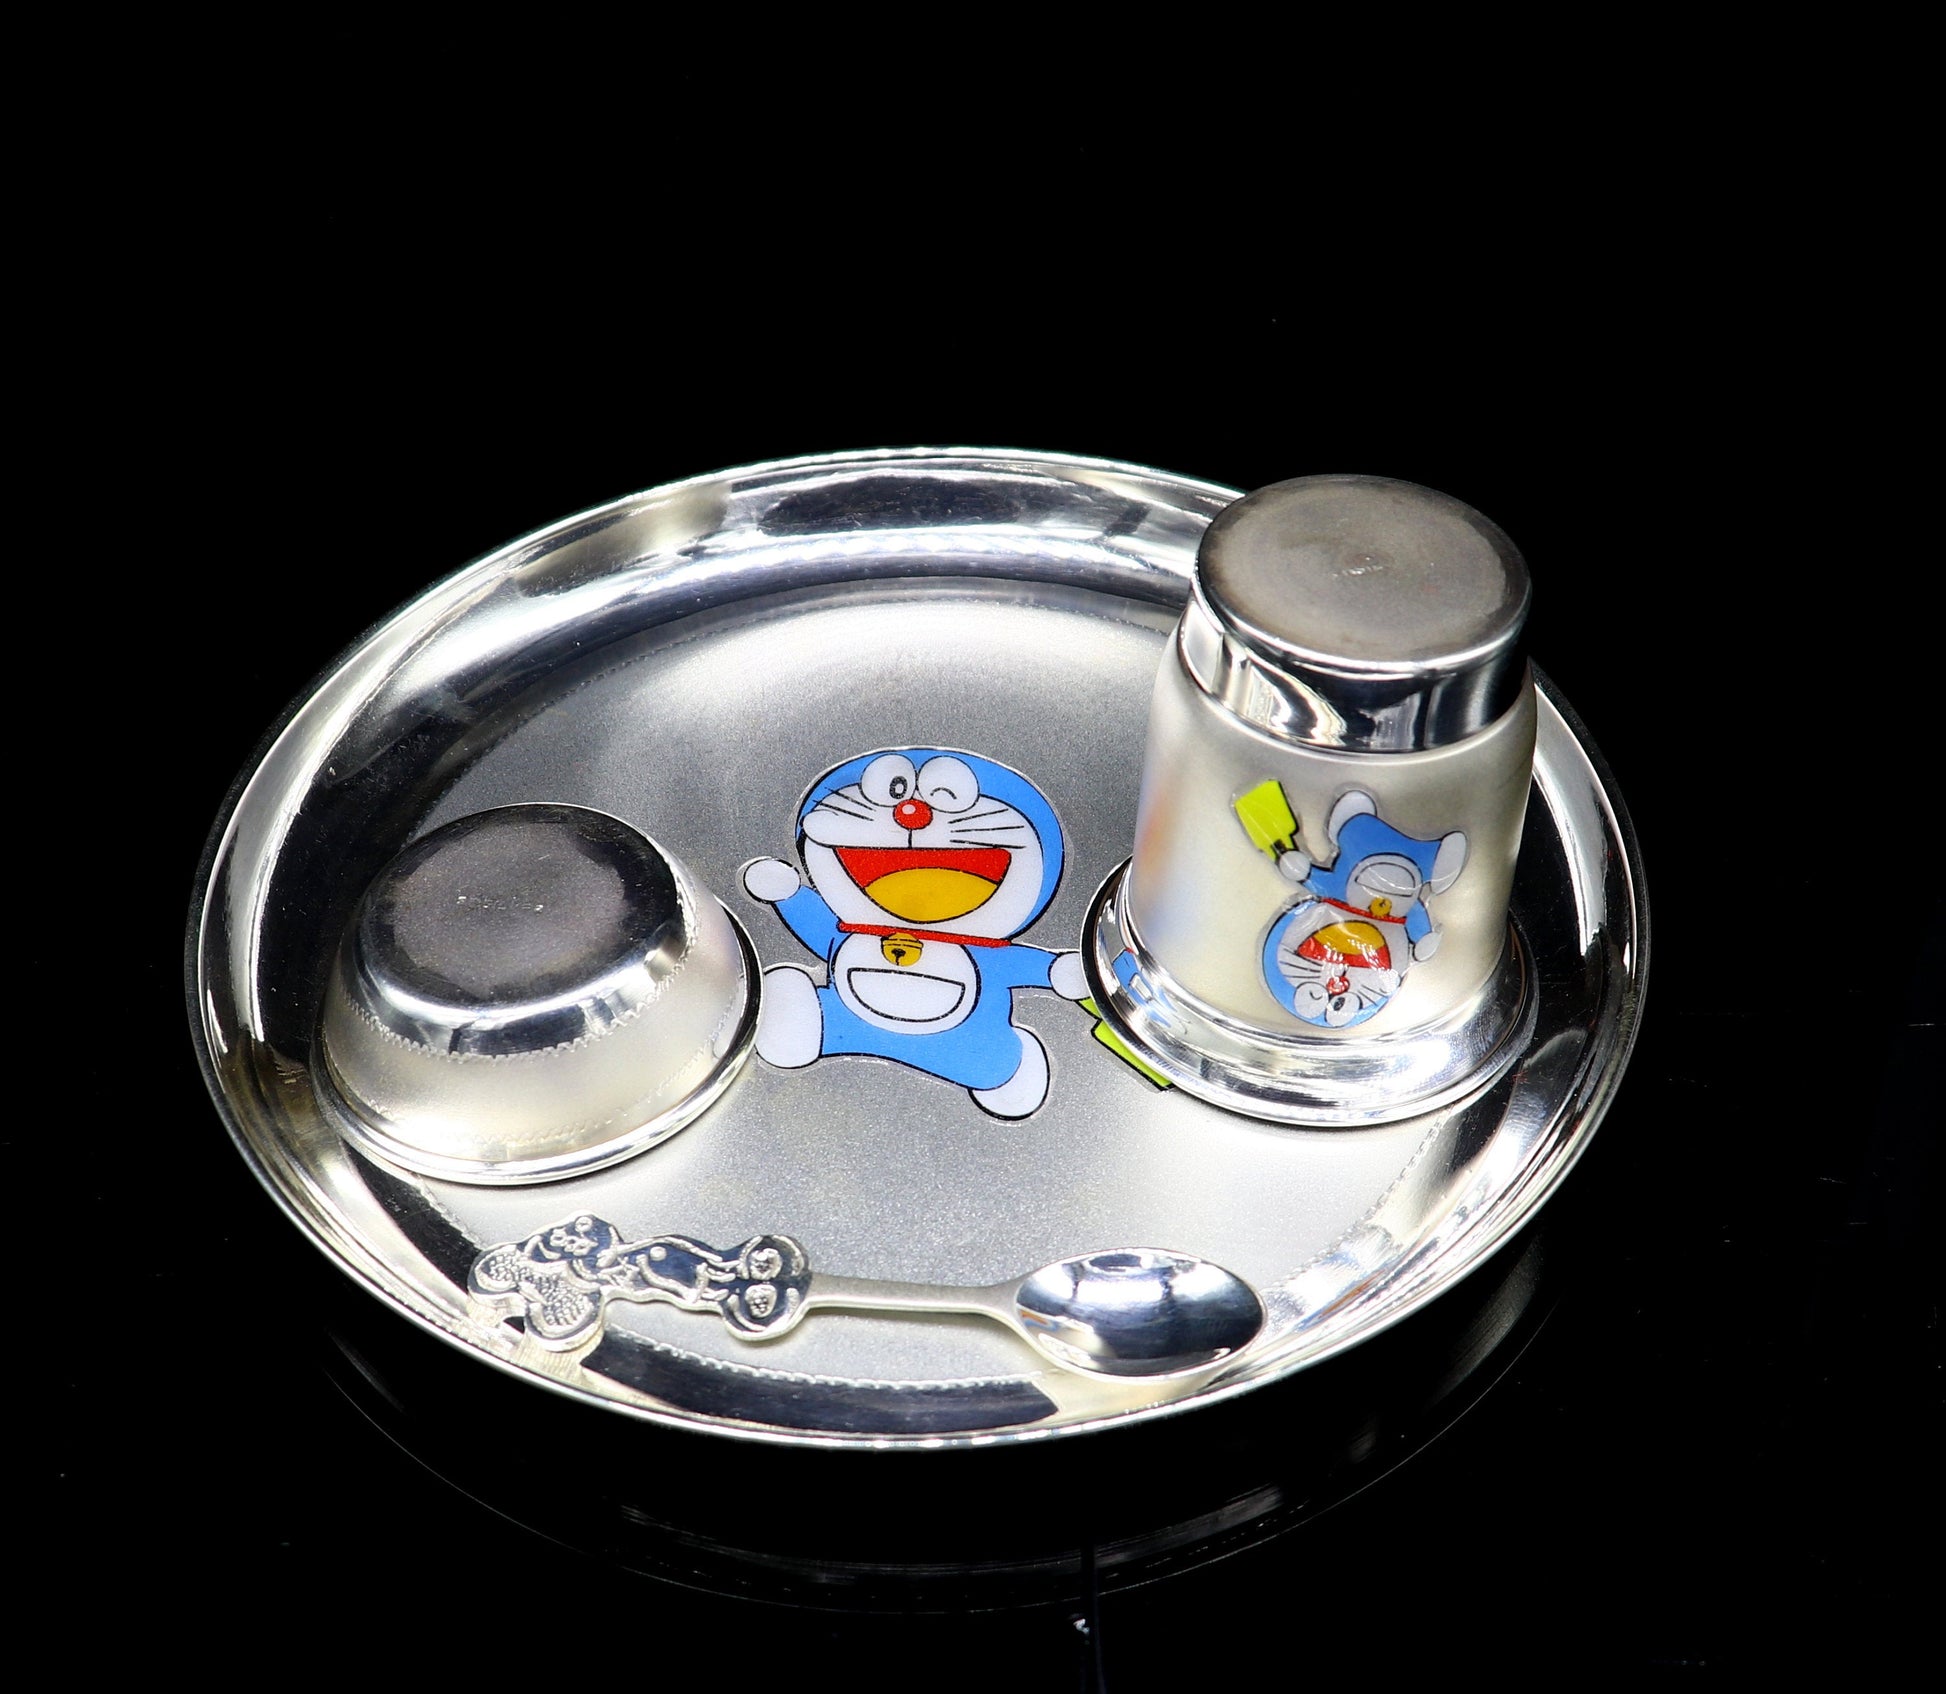 925 fine silver combo bowl, spoon ,Water/milk tumbler and plate/tray, silver baby dinner set utensils, best gifting utensils ideas sv131 - TRIBAL ORNAMENTS